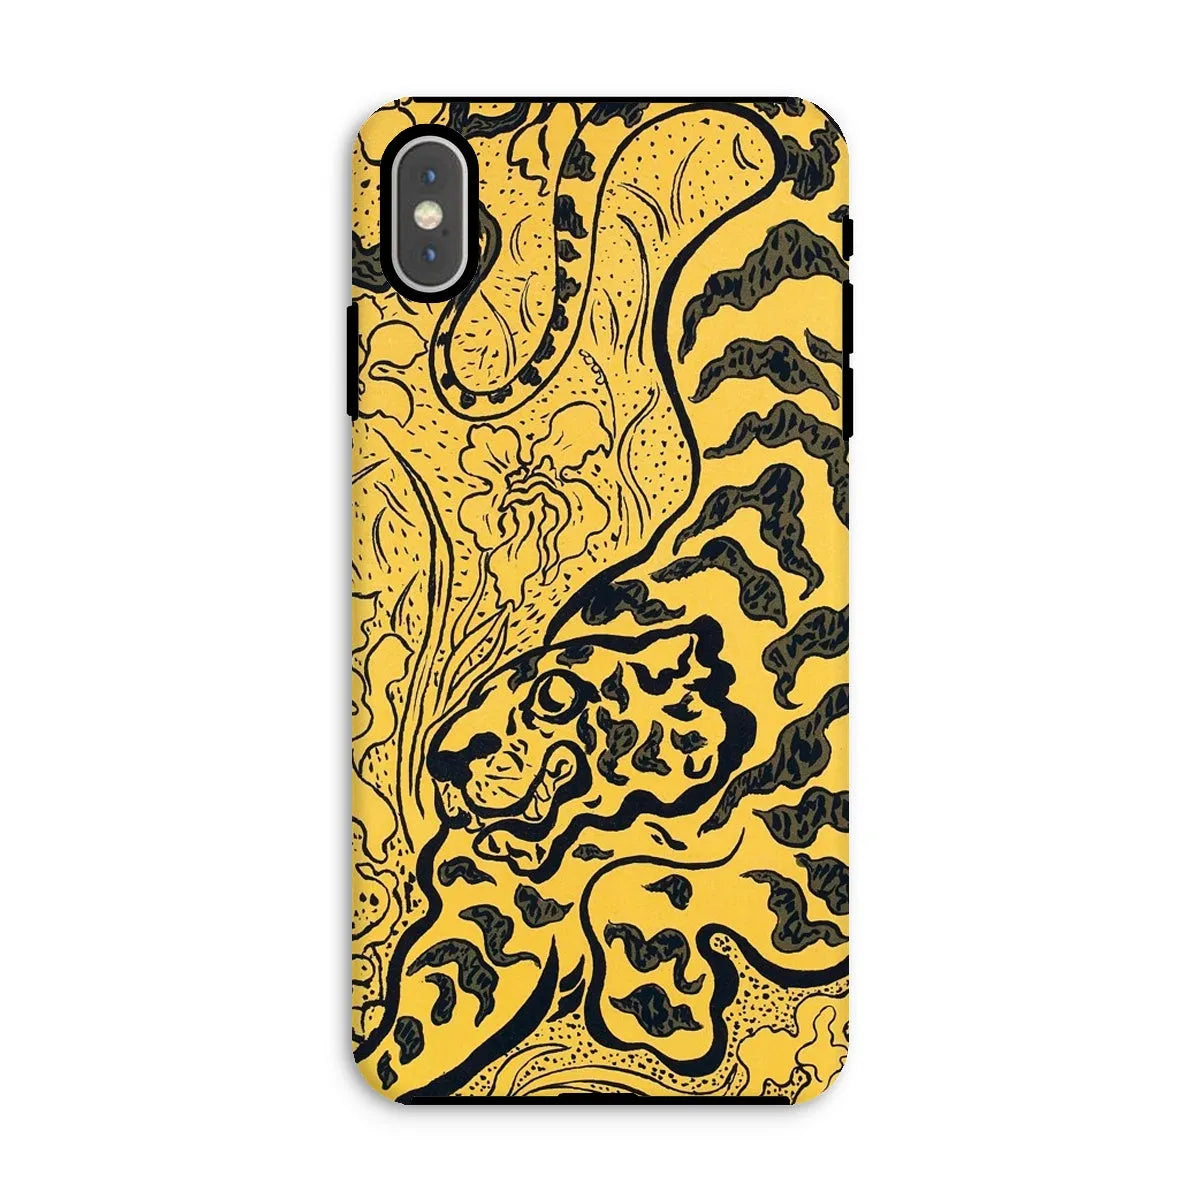 Tiger In The Jungle - Graphic Art Phone Case - Paul Ranson - Iphone Xs Max / Matte - Mobile Phone Cases - Aesthetic Art